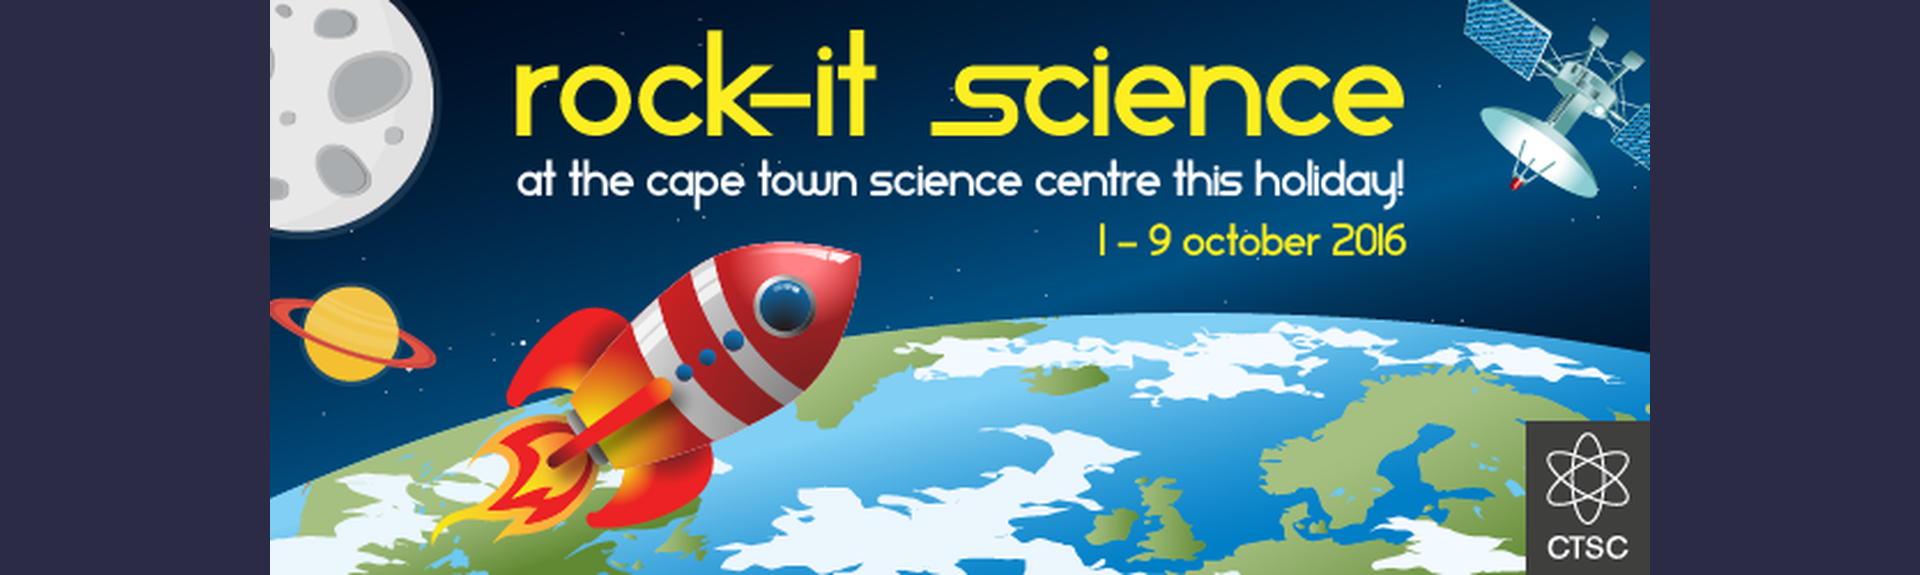  Rock-it Science Holiday Programme at the CTSC